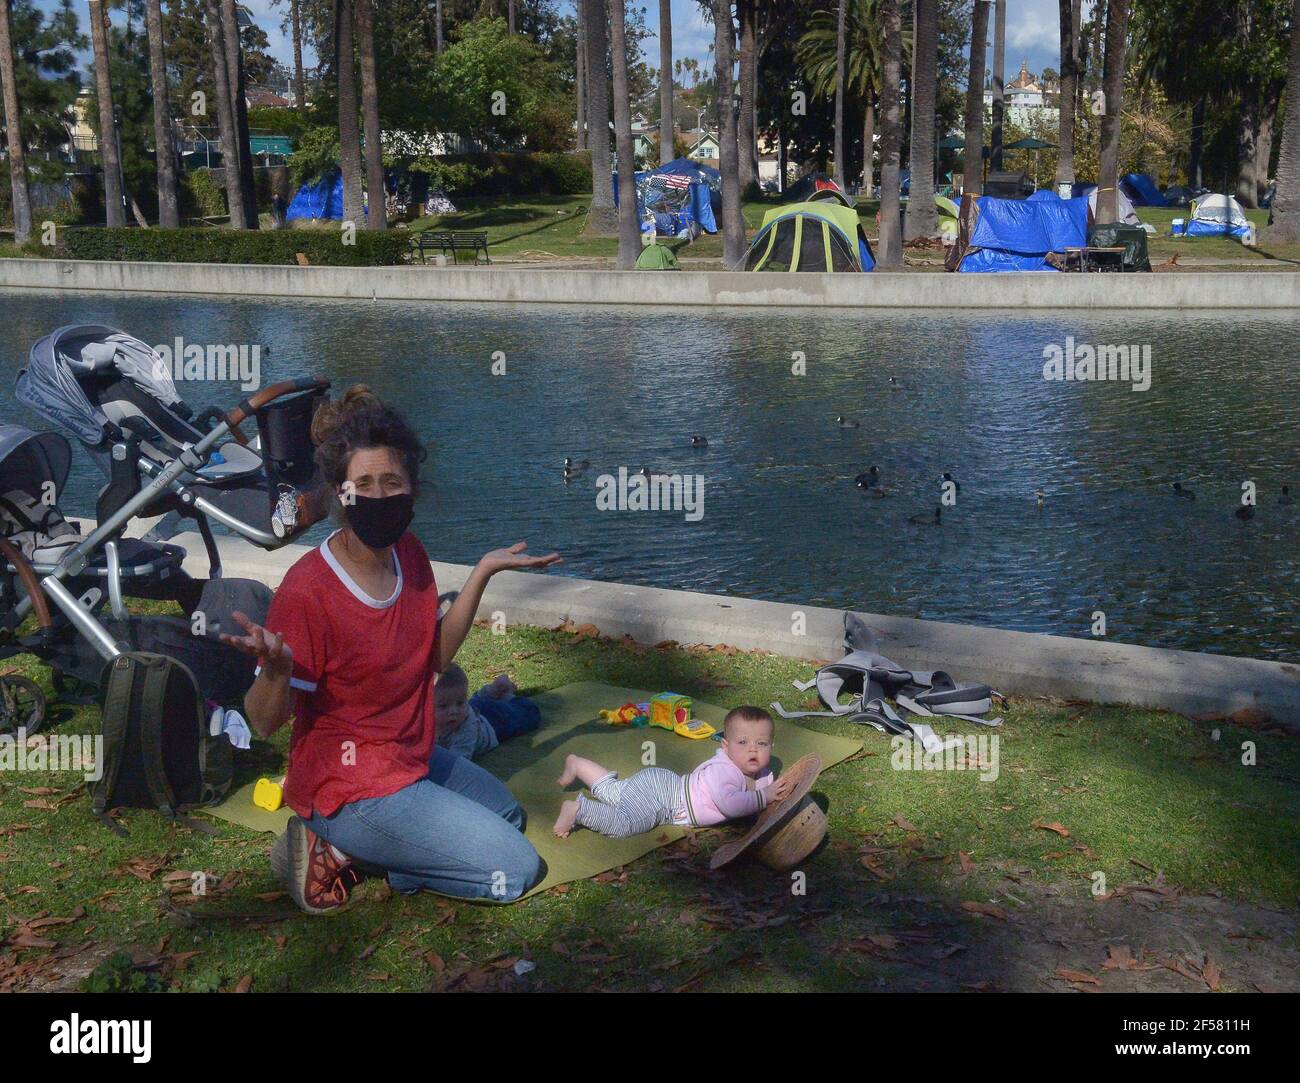 Los Angeles, United States. 24th Mar, 2021. Awoman tends to her twins in  the shadow of a homeless encampment at Echo Park Lake in Los Angeles on  Monday, March 23, 2021. The